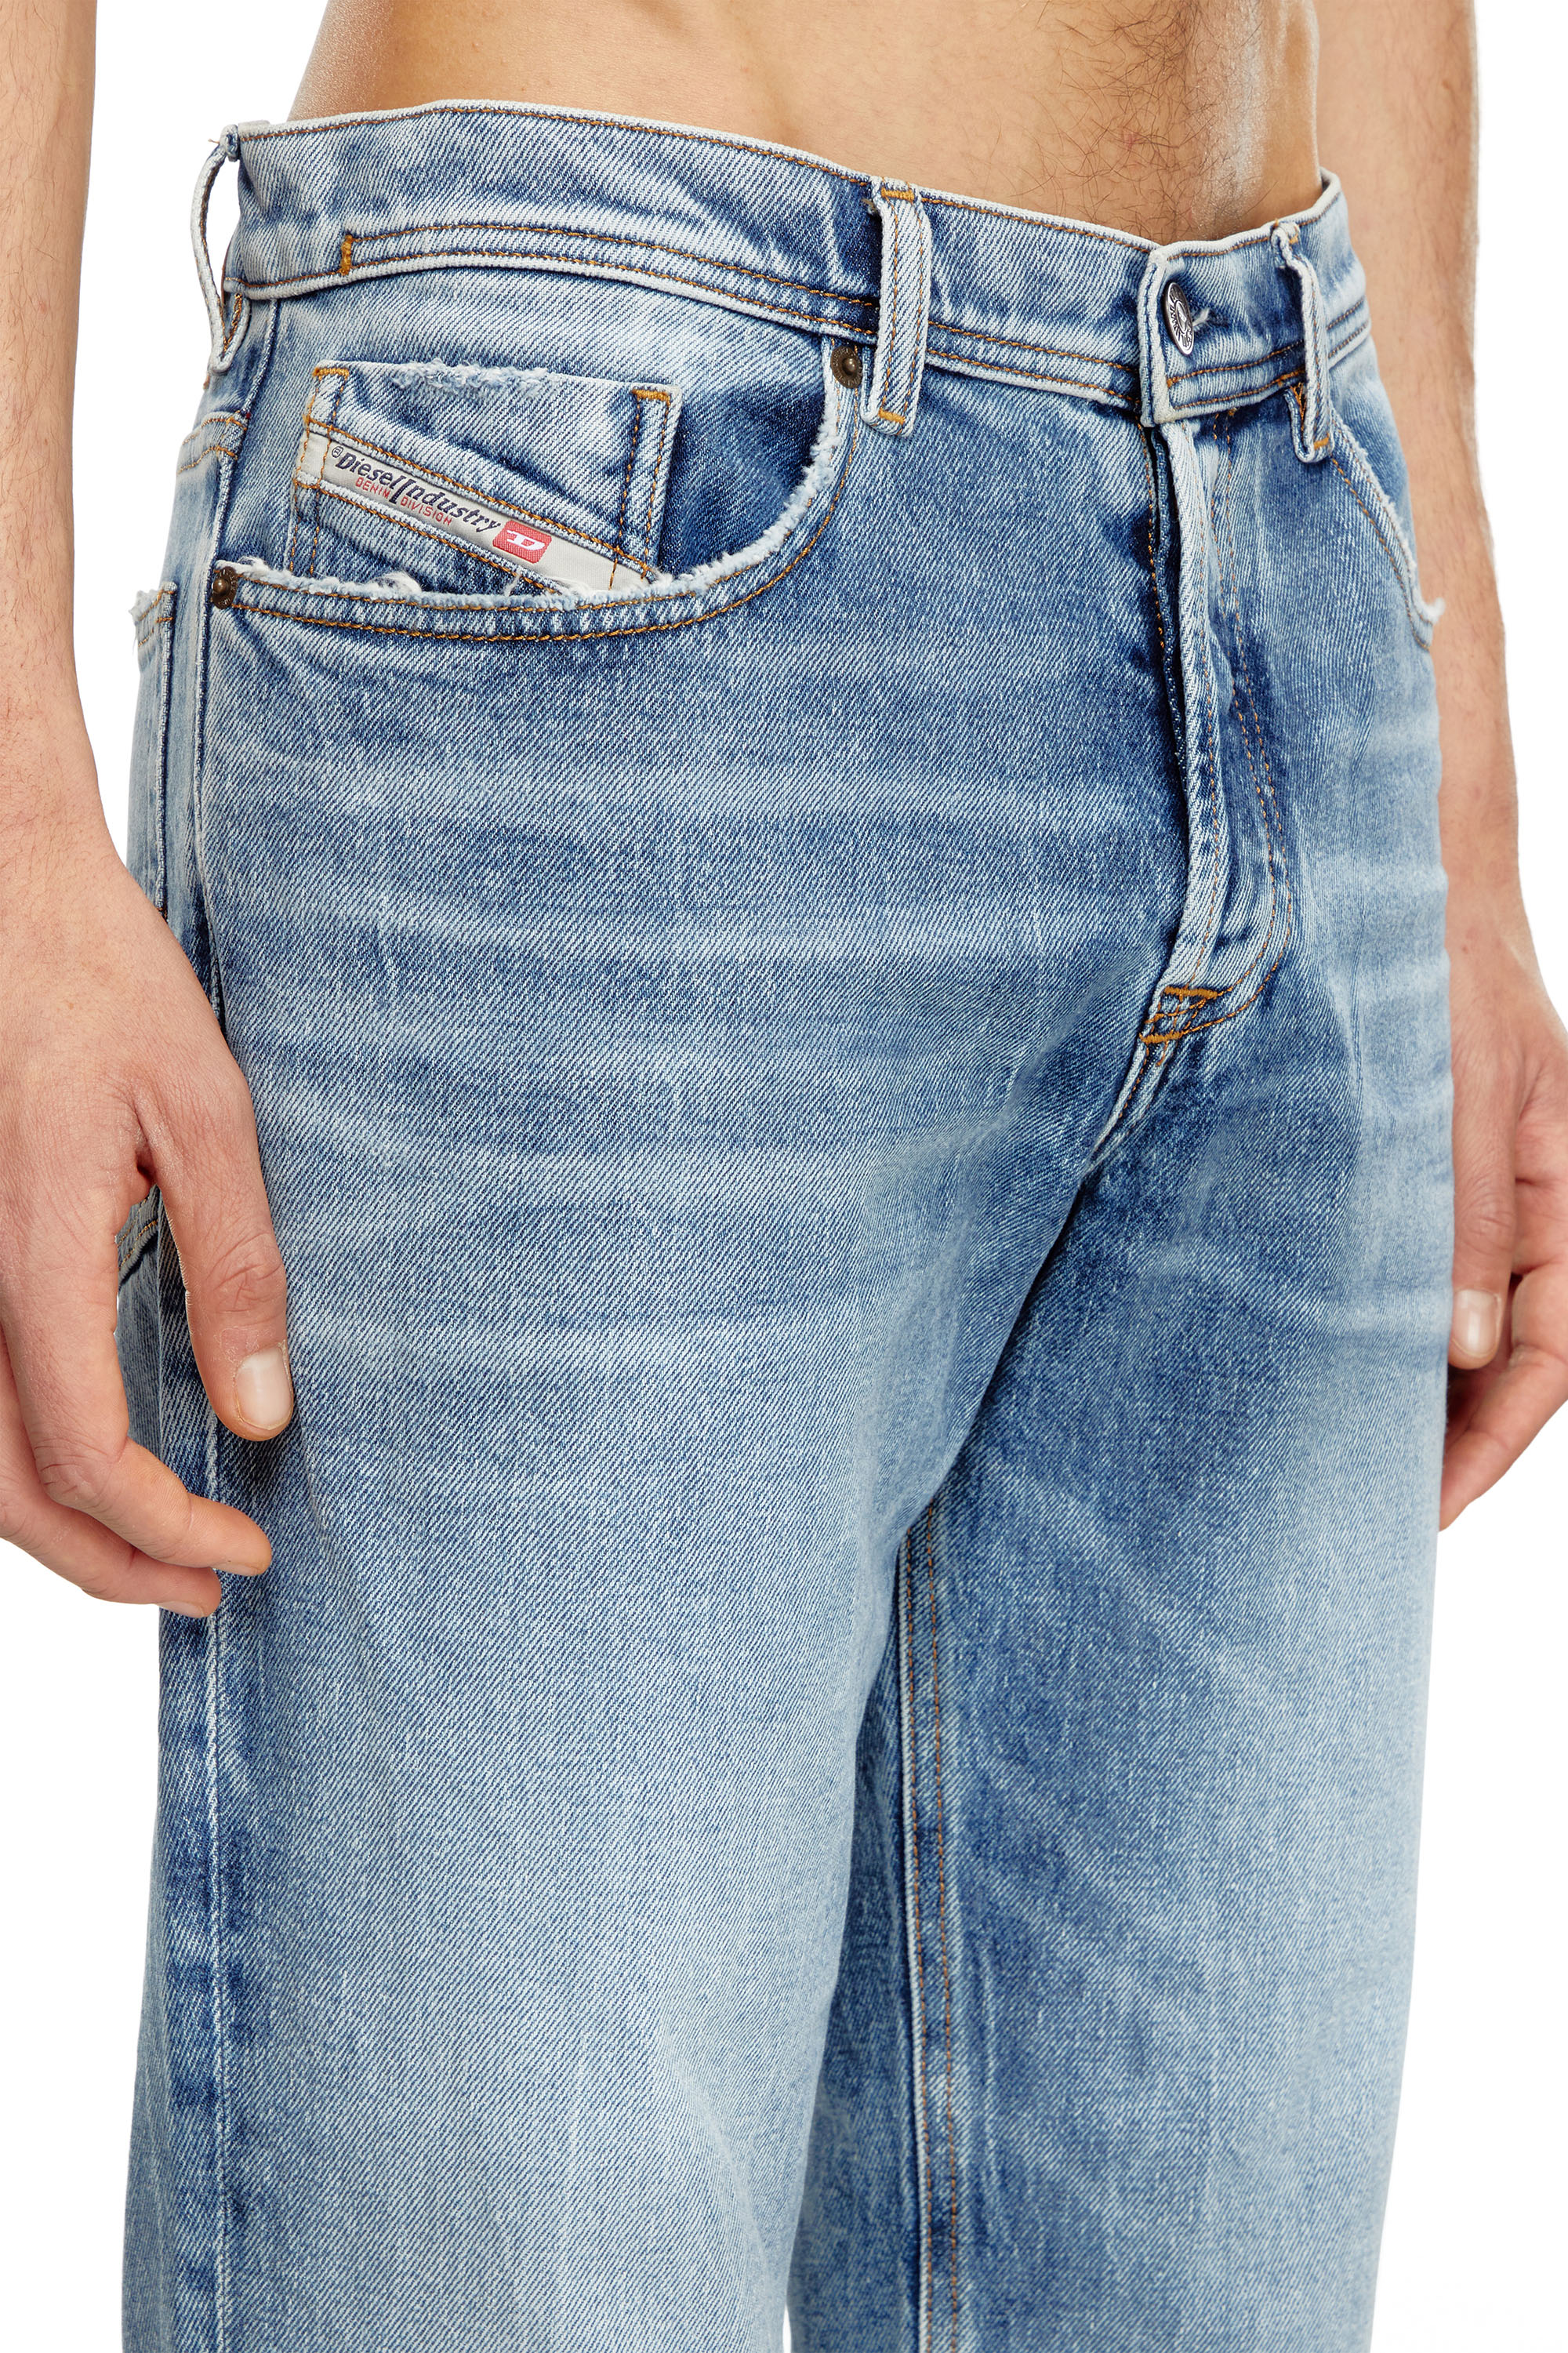 Diesel - Tapered Jeans 2023 D-Finitive 09J54, Hombre Tapered Jeans - 2023 D-Finitive in Azul marino - Image 4